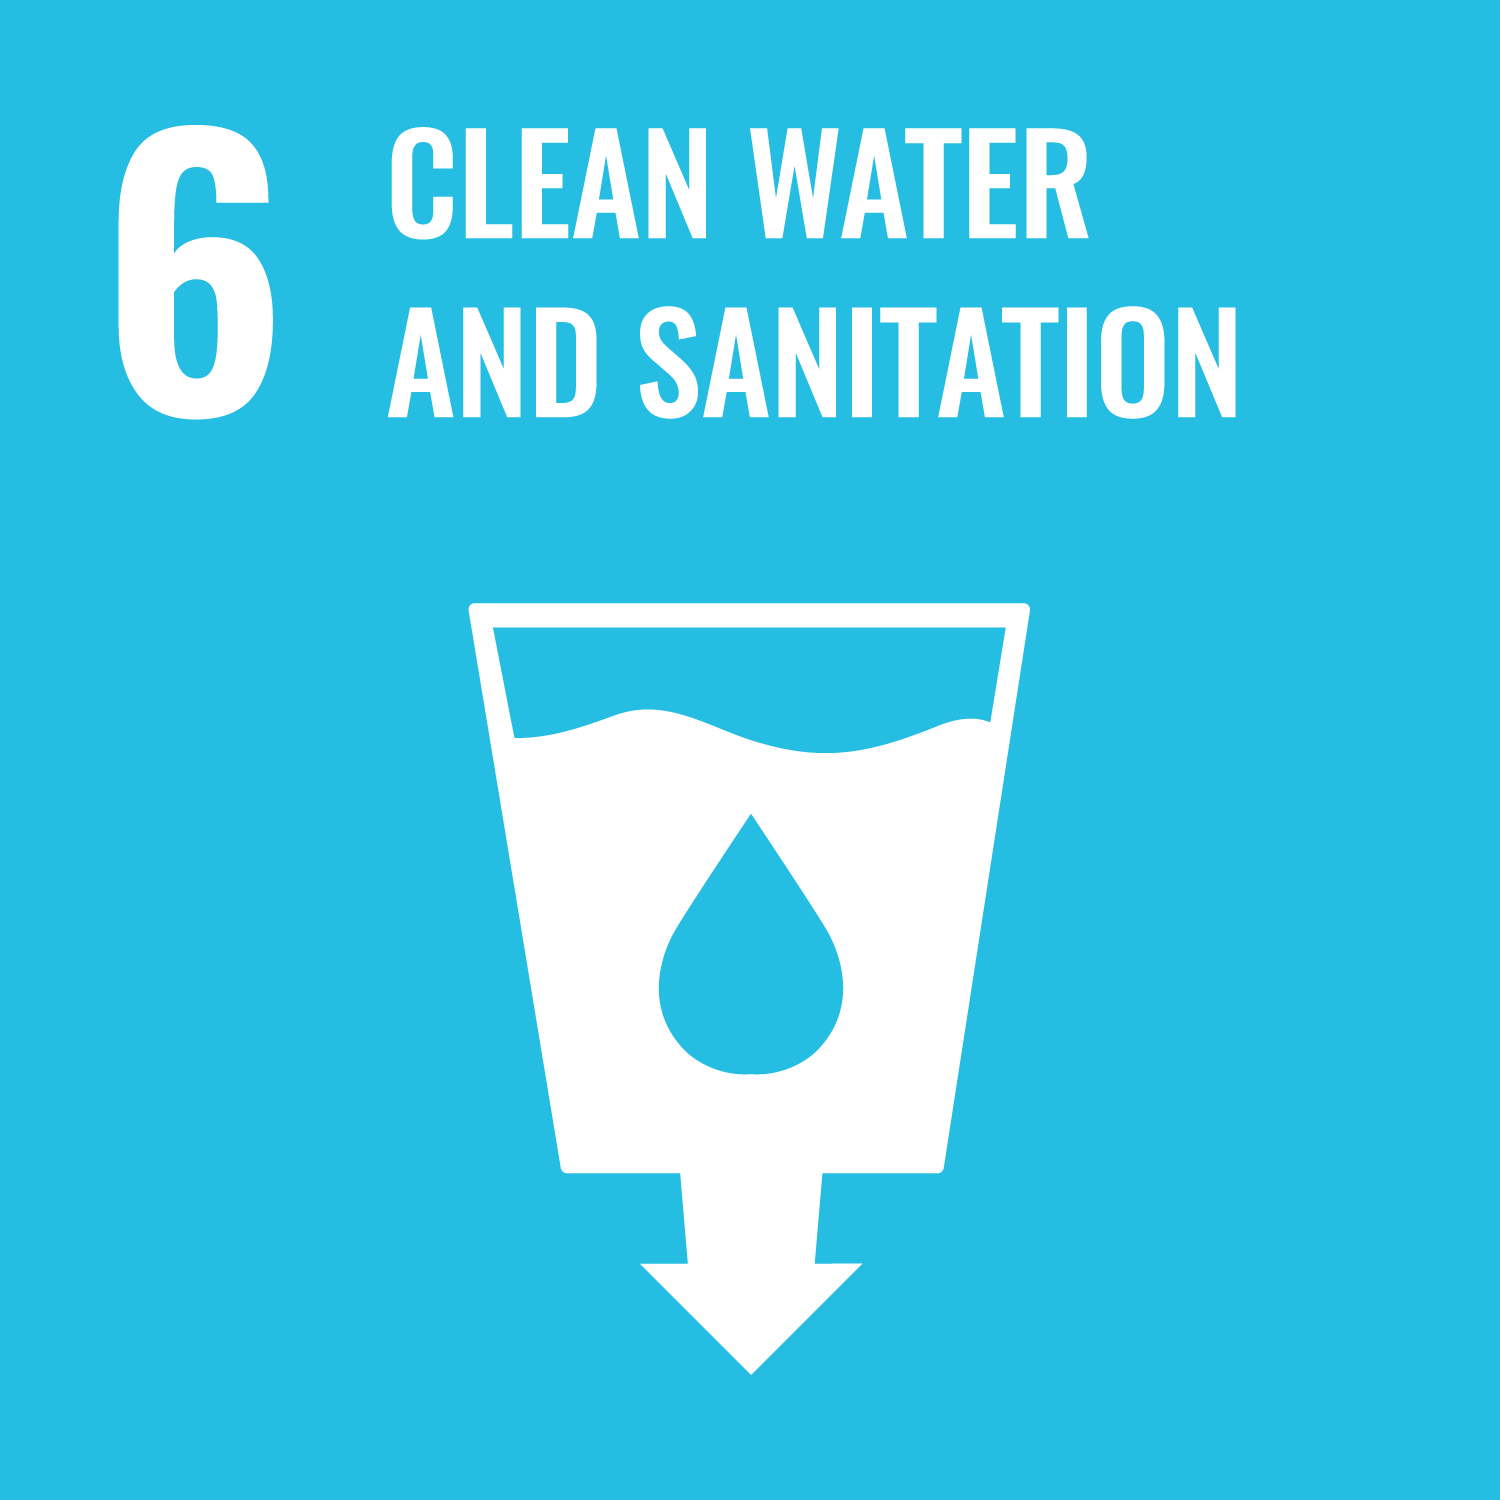 Sustainable Development Goal: SDG 6 "Clean Water and Sanitation"